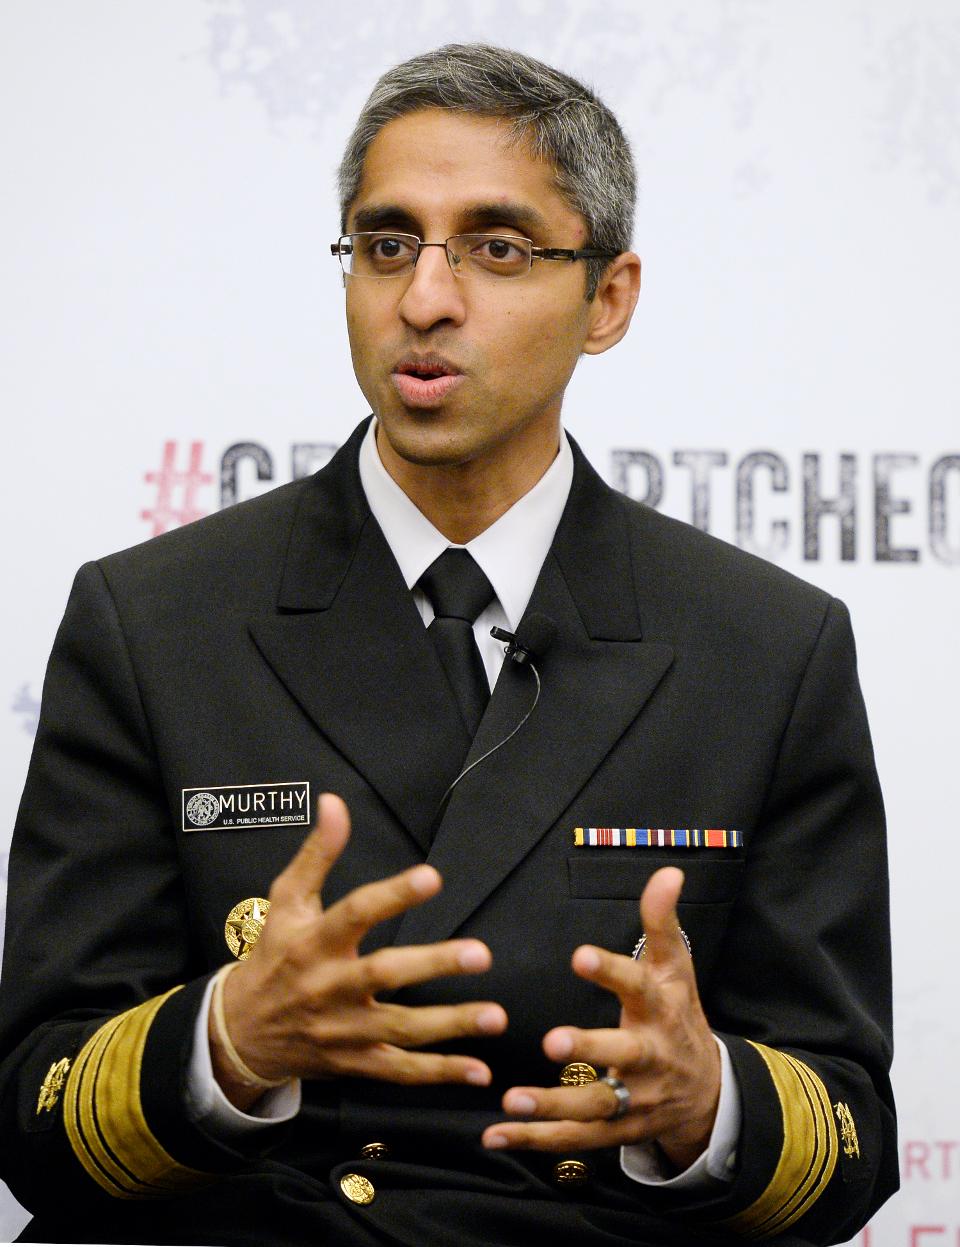 Dr. Vivek H. Murthy, 19th Surgeon General of the United States, describes a loneliness epidemic sweeping today's workplace.